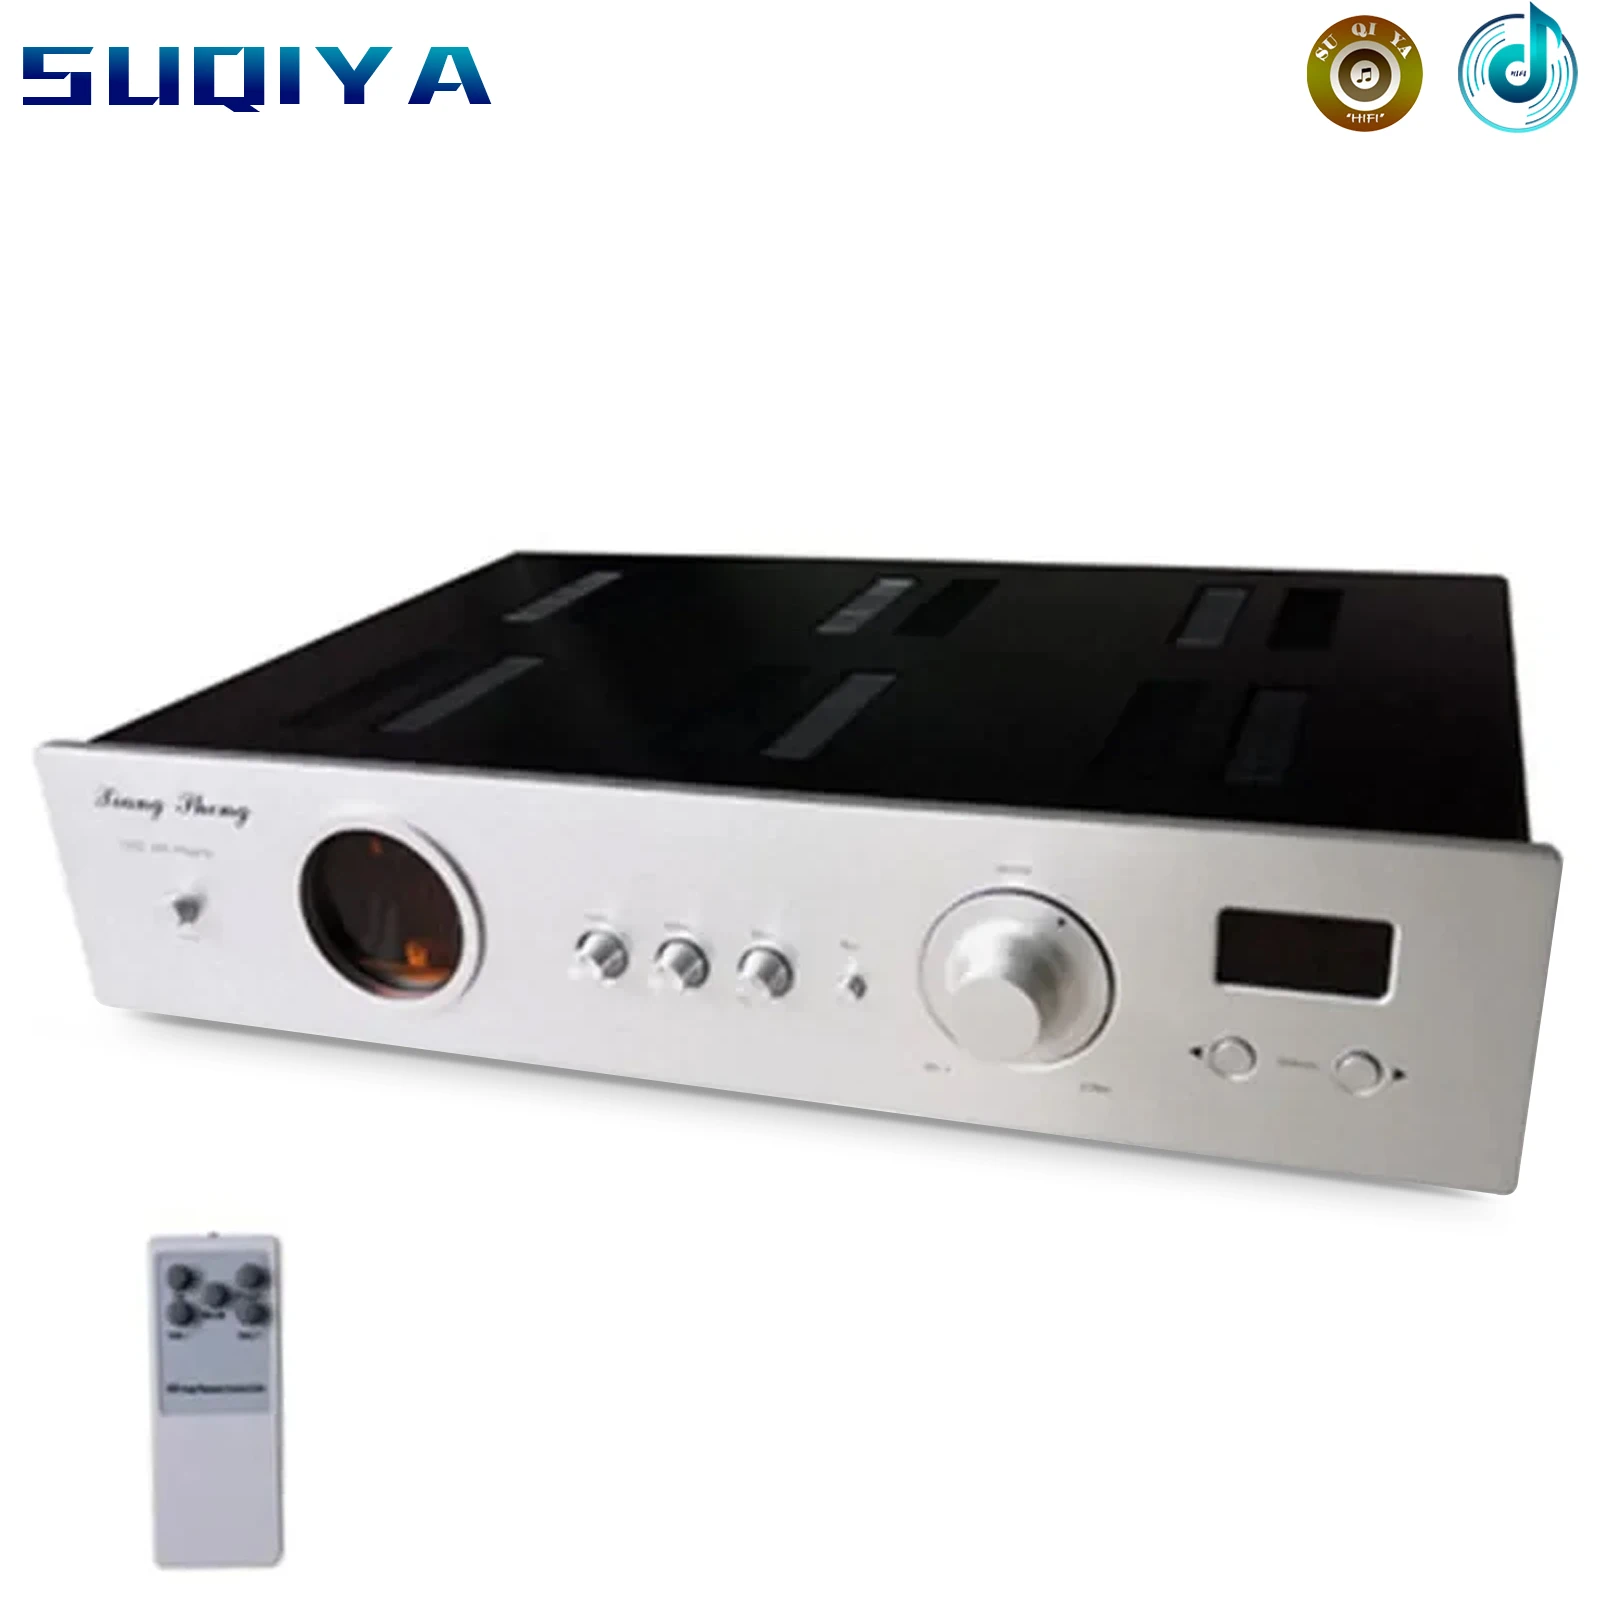 

728A Vacuum 12AT7 12AU7 6Z4 Tube Pre Amplifier Stereo HiFi Preamp Audio tube preamplifier With remote control / CS8675 Bluetooth